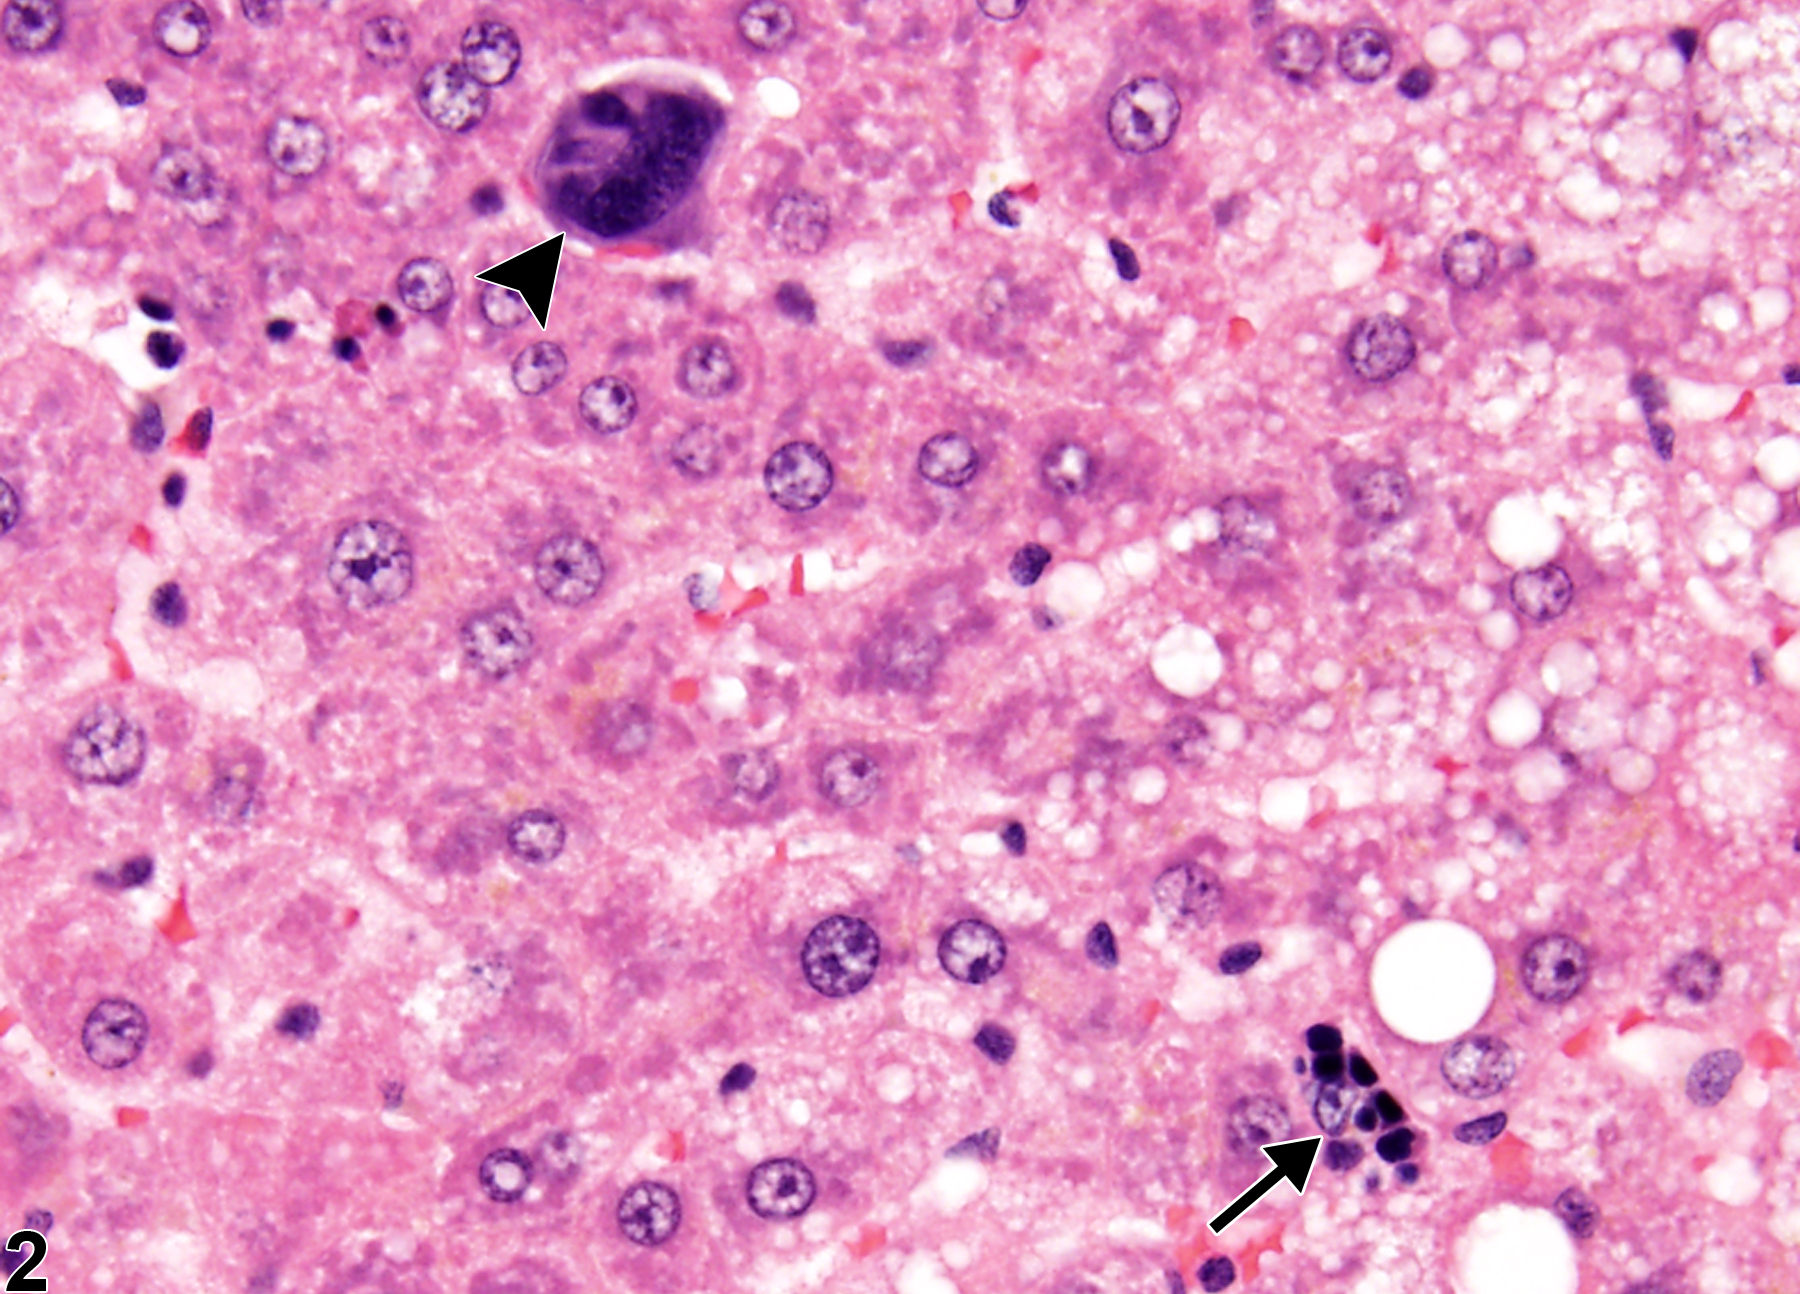 Image of extramedullary hematopoiesis in the liver from a female Harlan Sprague-Dawley rat in a chronic study